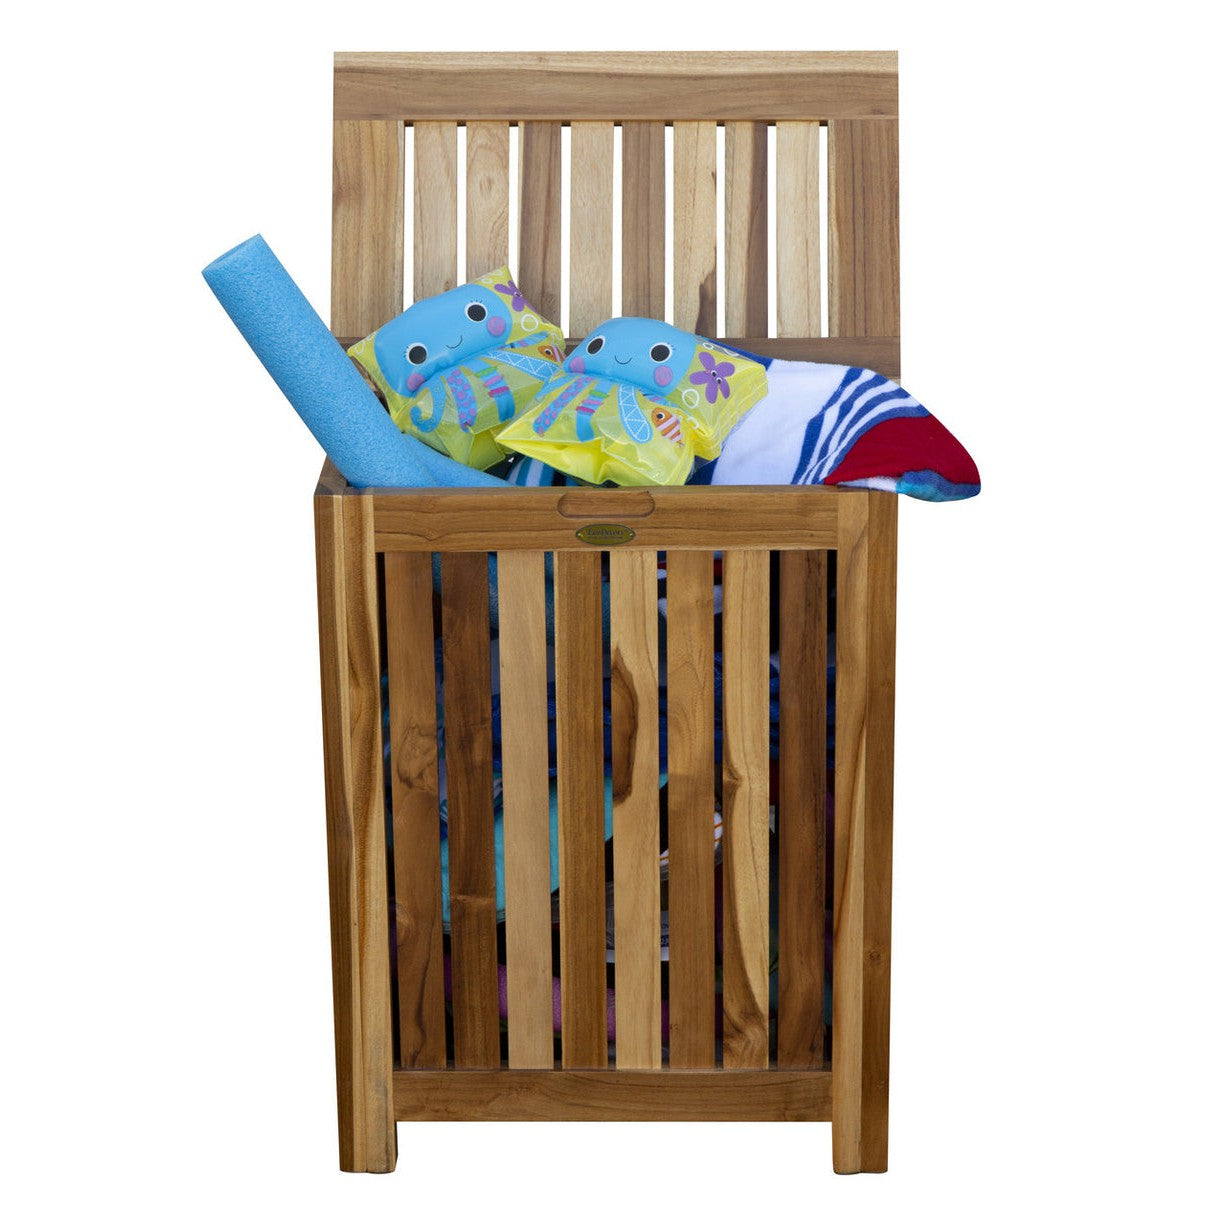 EcoDecors Eleganto 19" W x 26" H EarthyTeak Solid Teak Wood Double Laundry Storage Hamper With Removable Bags